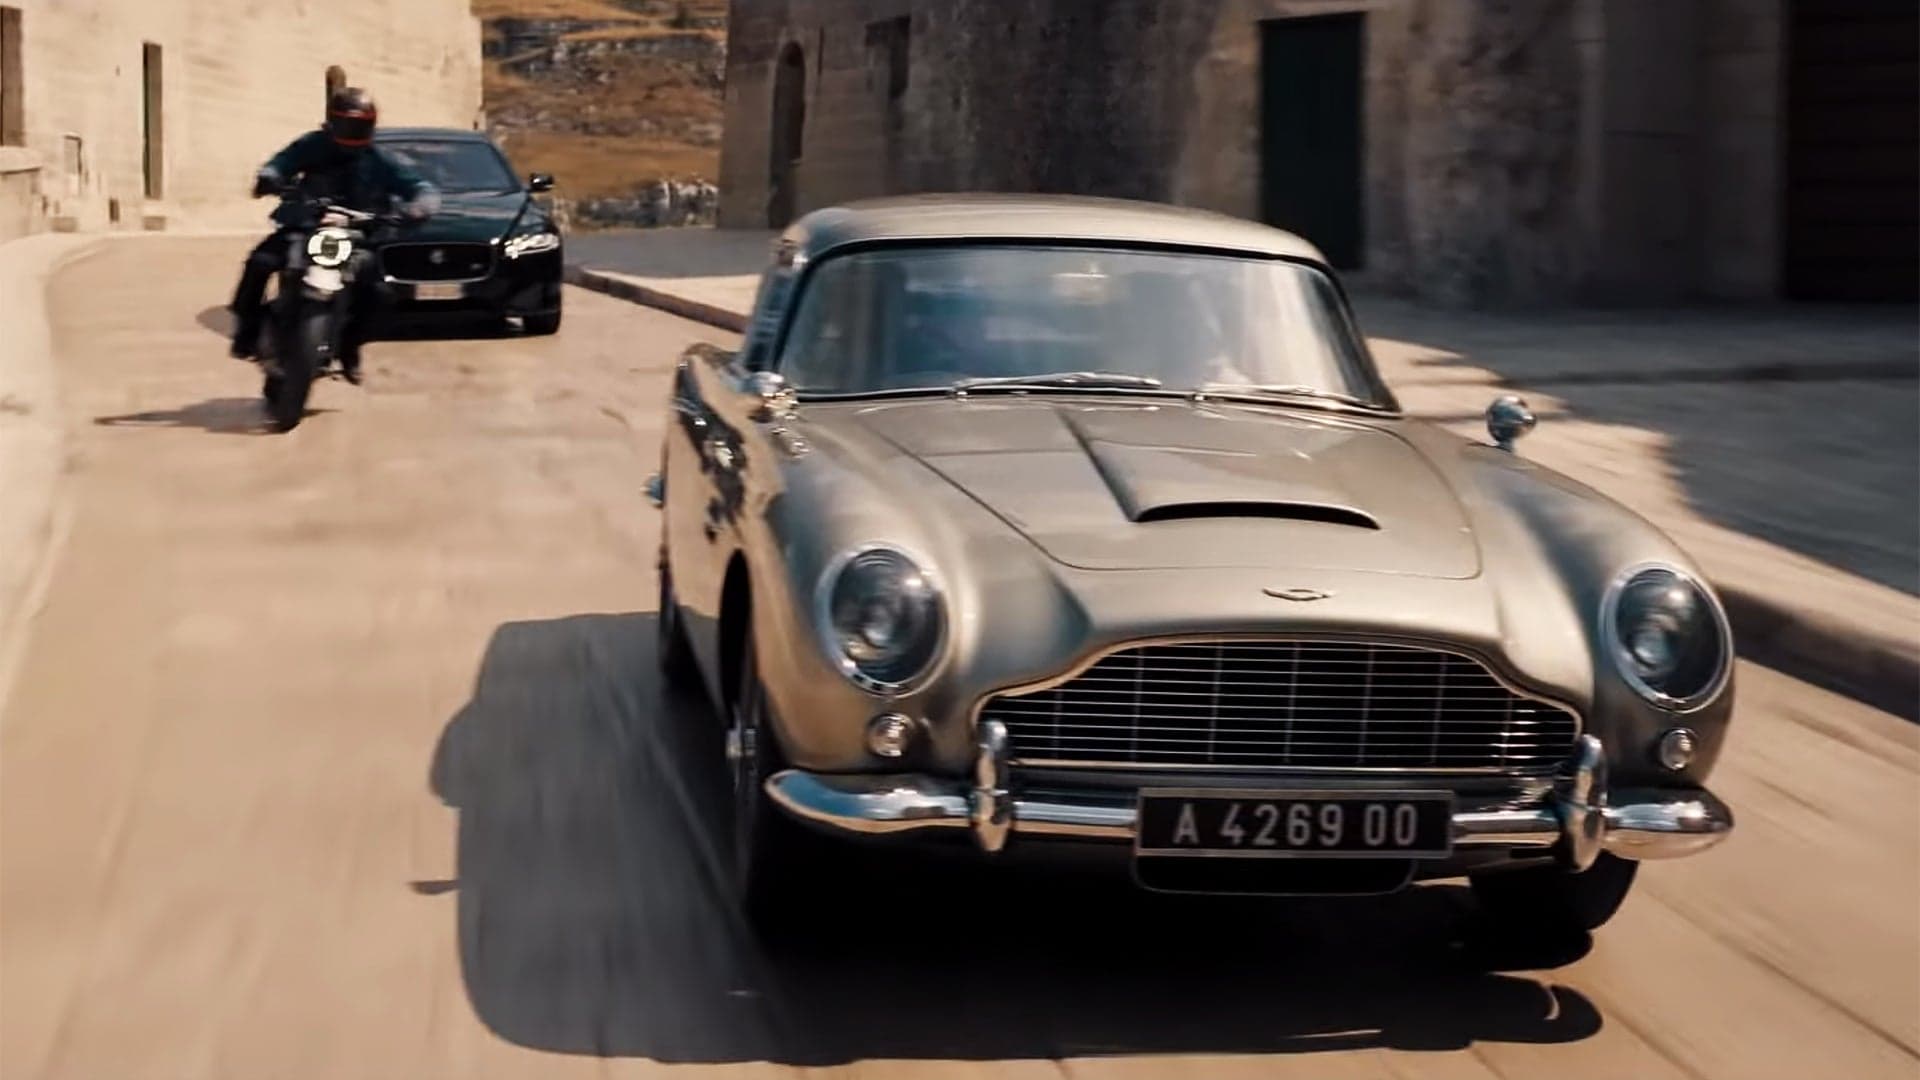 How Many Bond Cars Can You Identify in the New No Time to Die Trailer?